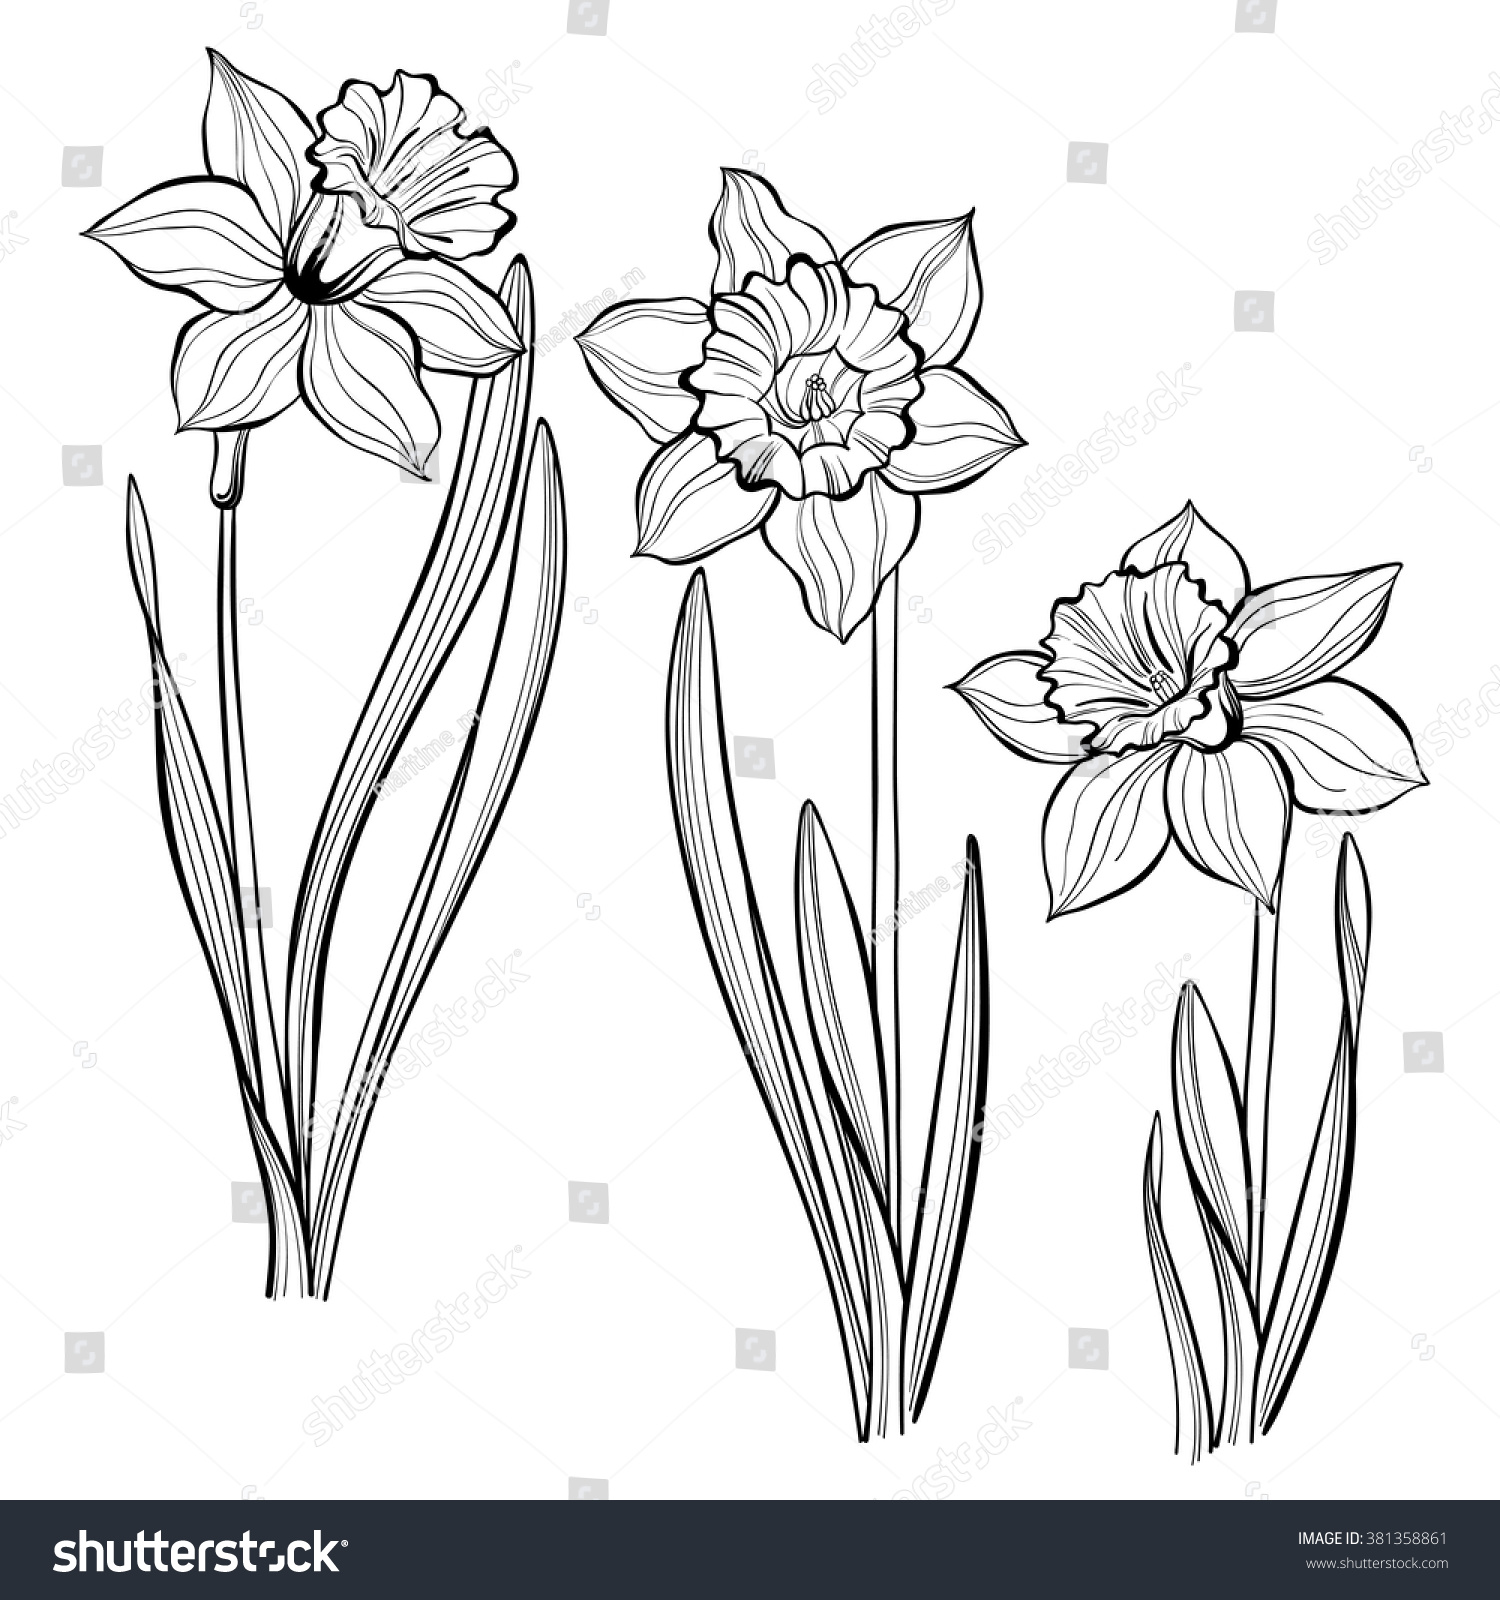 SVG of Set of spring flowers daffodils isolated on white background.  Hand drawn vector illustration, sketch. Elements for design. svg